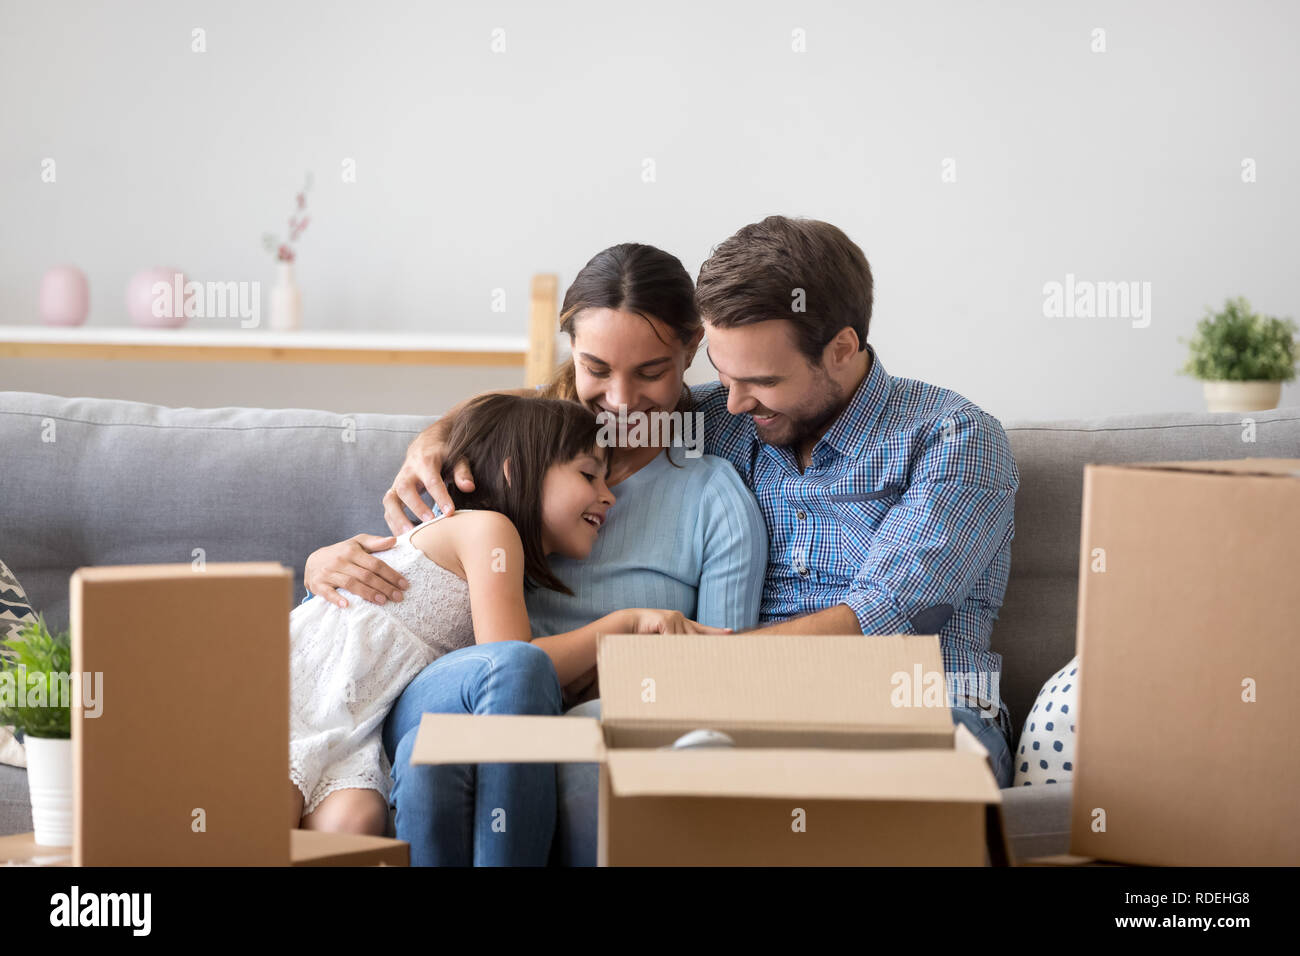 Happy parents with kid embracing on sofa enjoy moving day Stock Photo